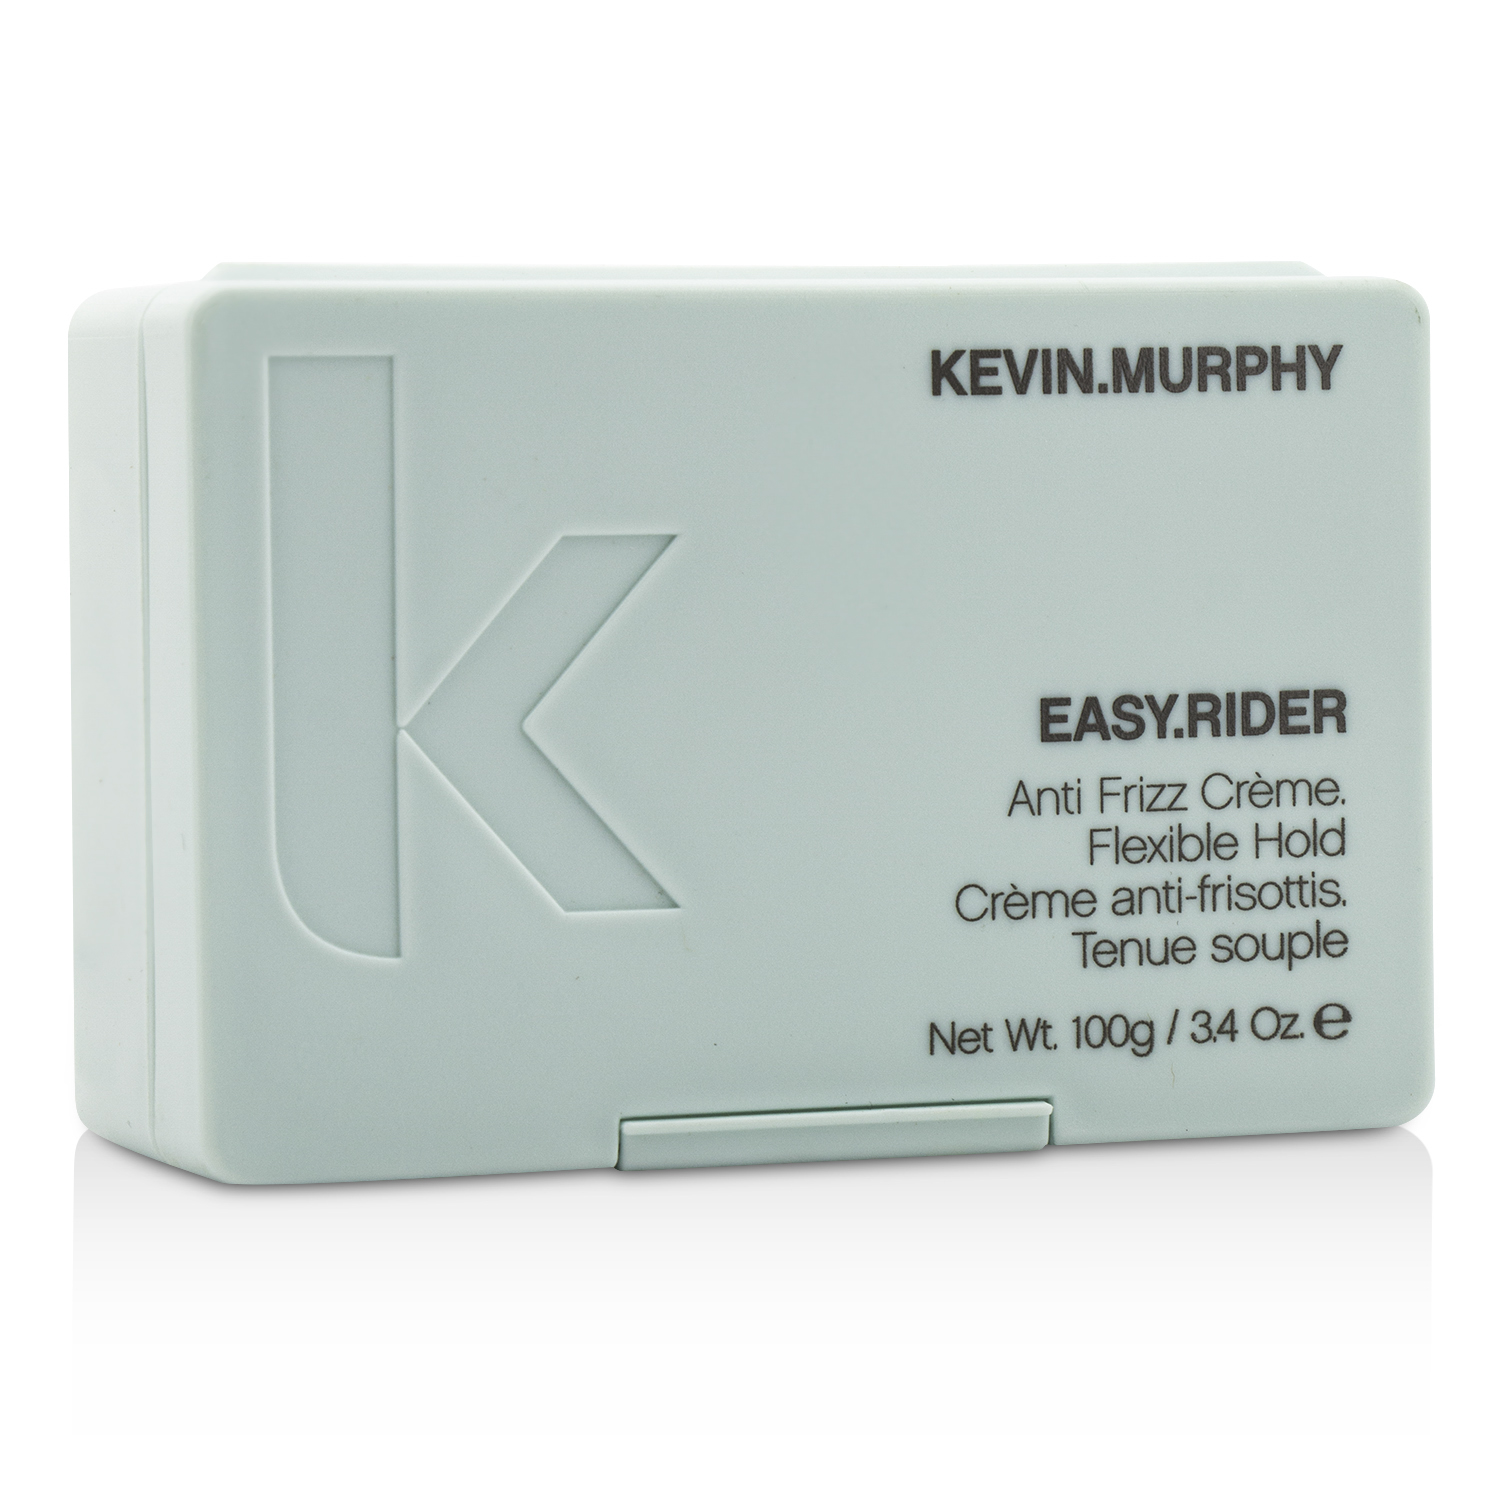 Easy.Rider Anti Frizz Creme (Flexible Hold) Kevin.Murphy Image